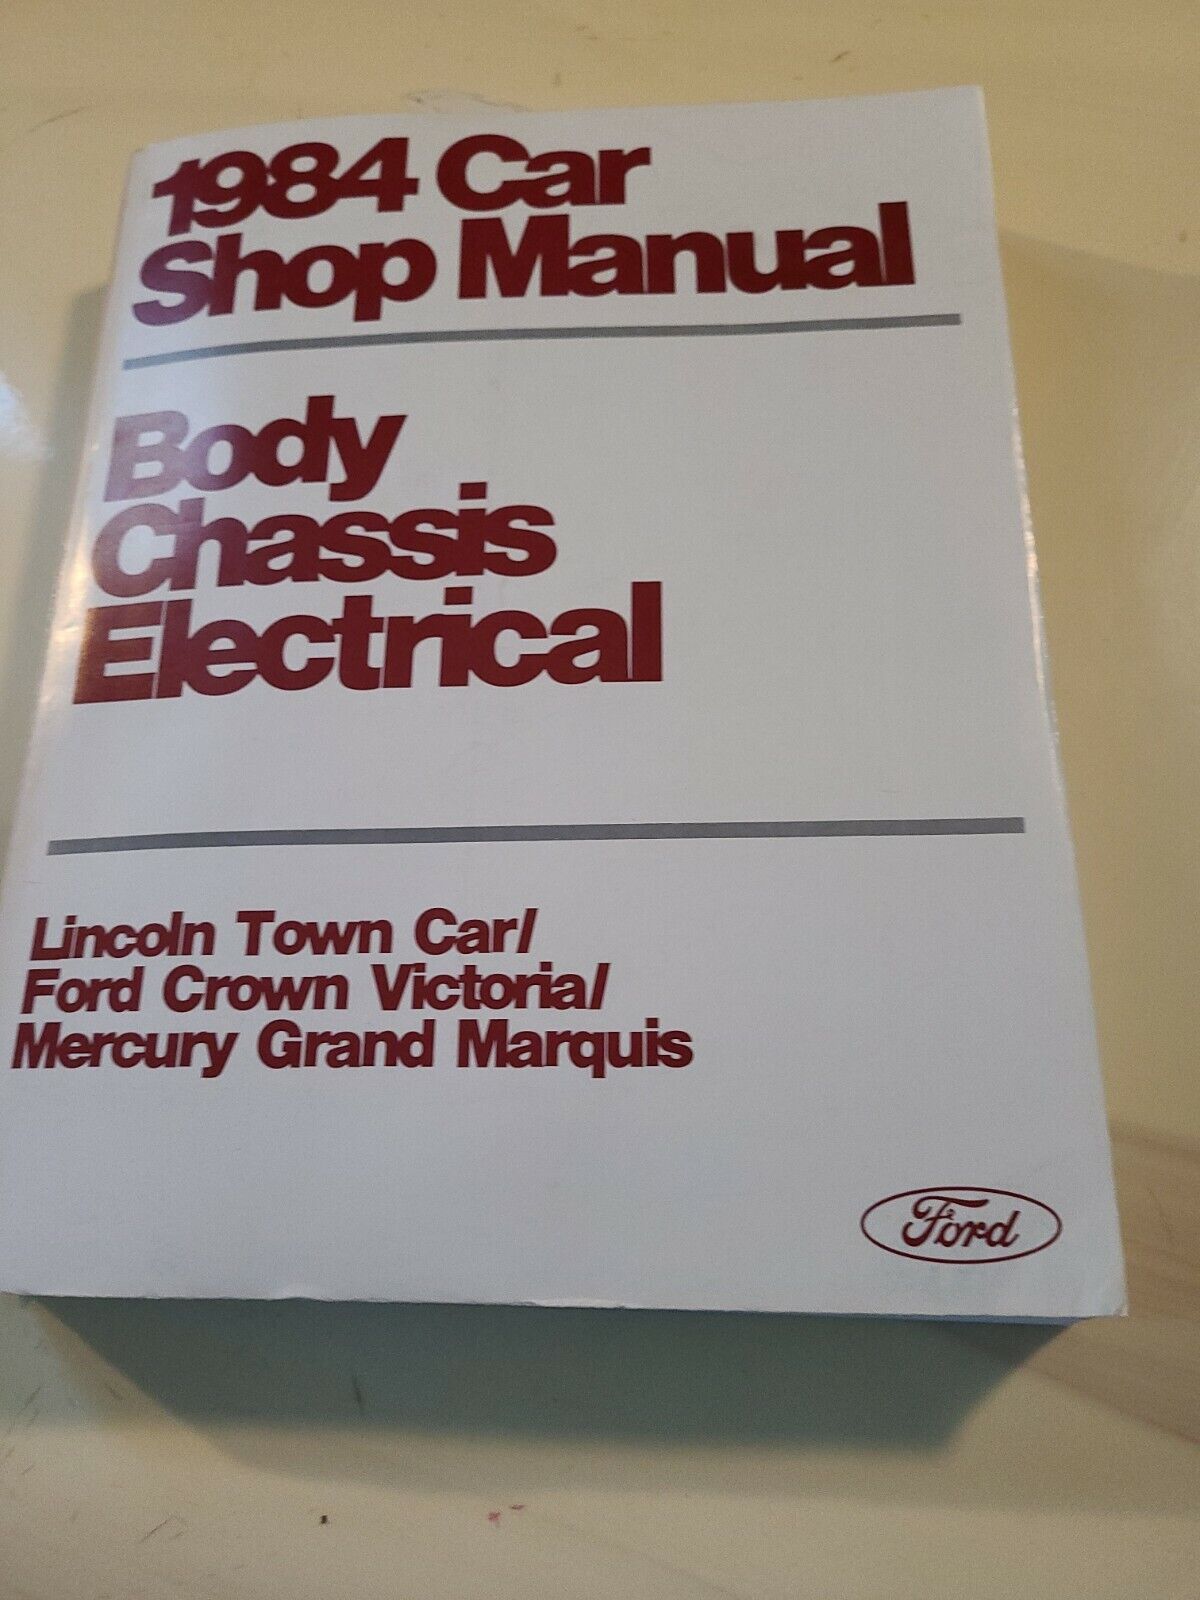 1984 FORD CAR SHOP MANUAL BODY CHASSIS ELECTRICAL  RARE VTG